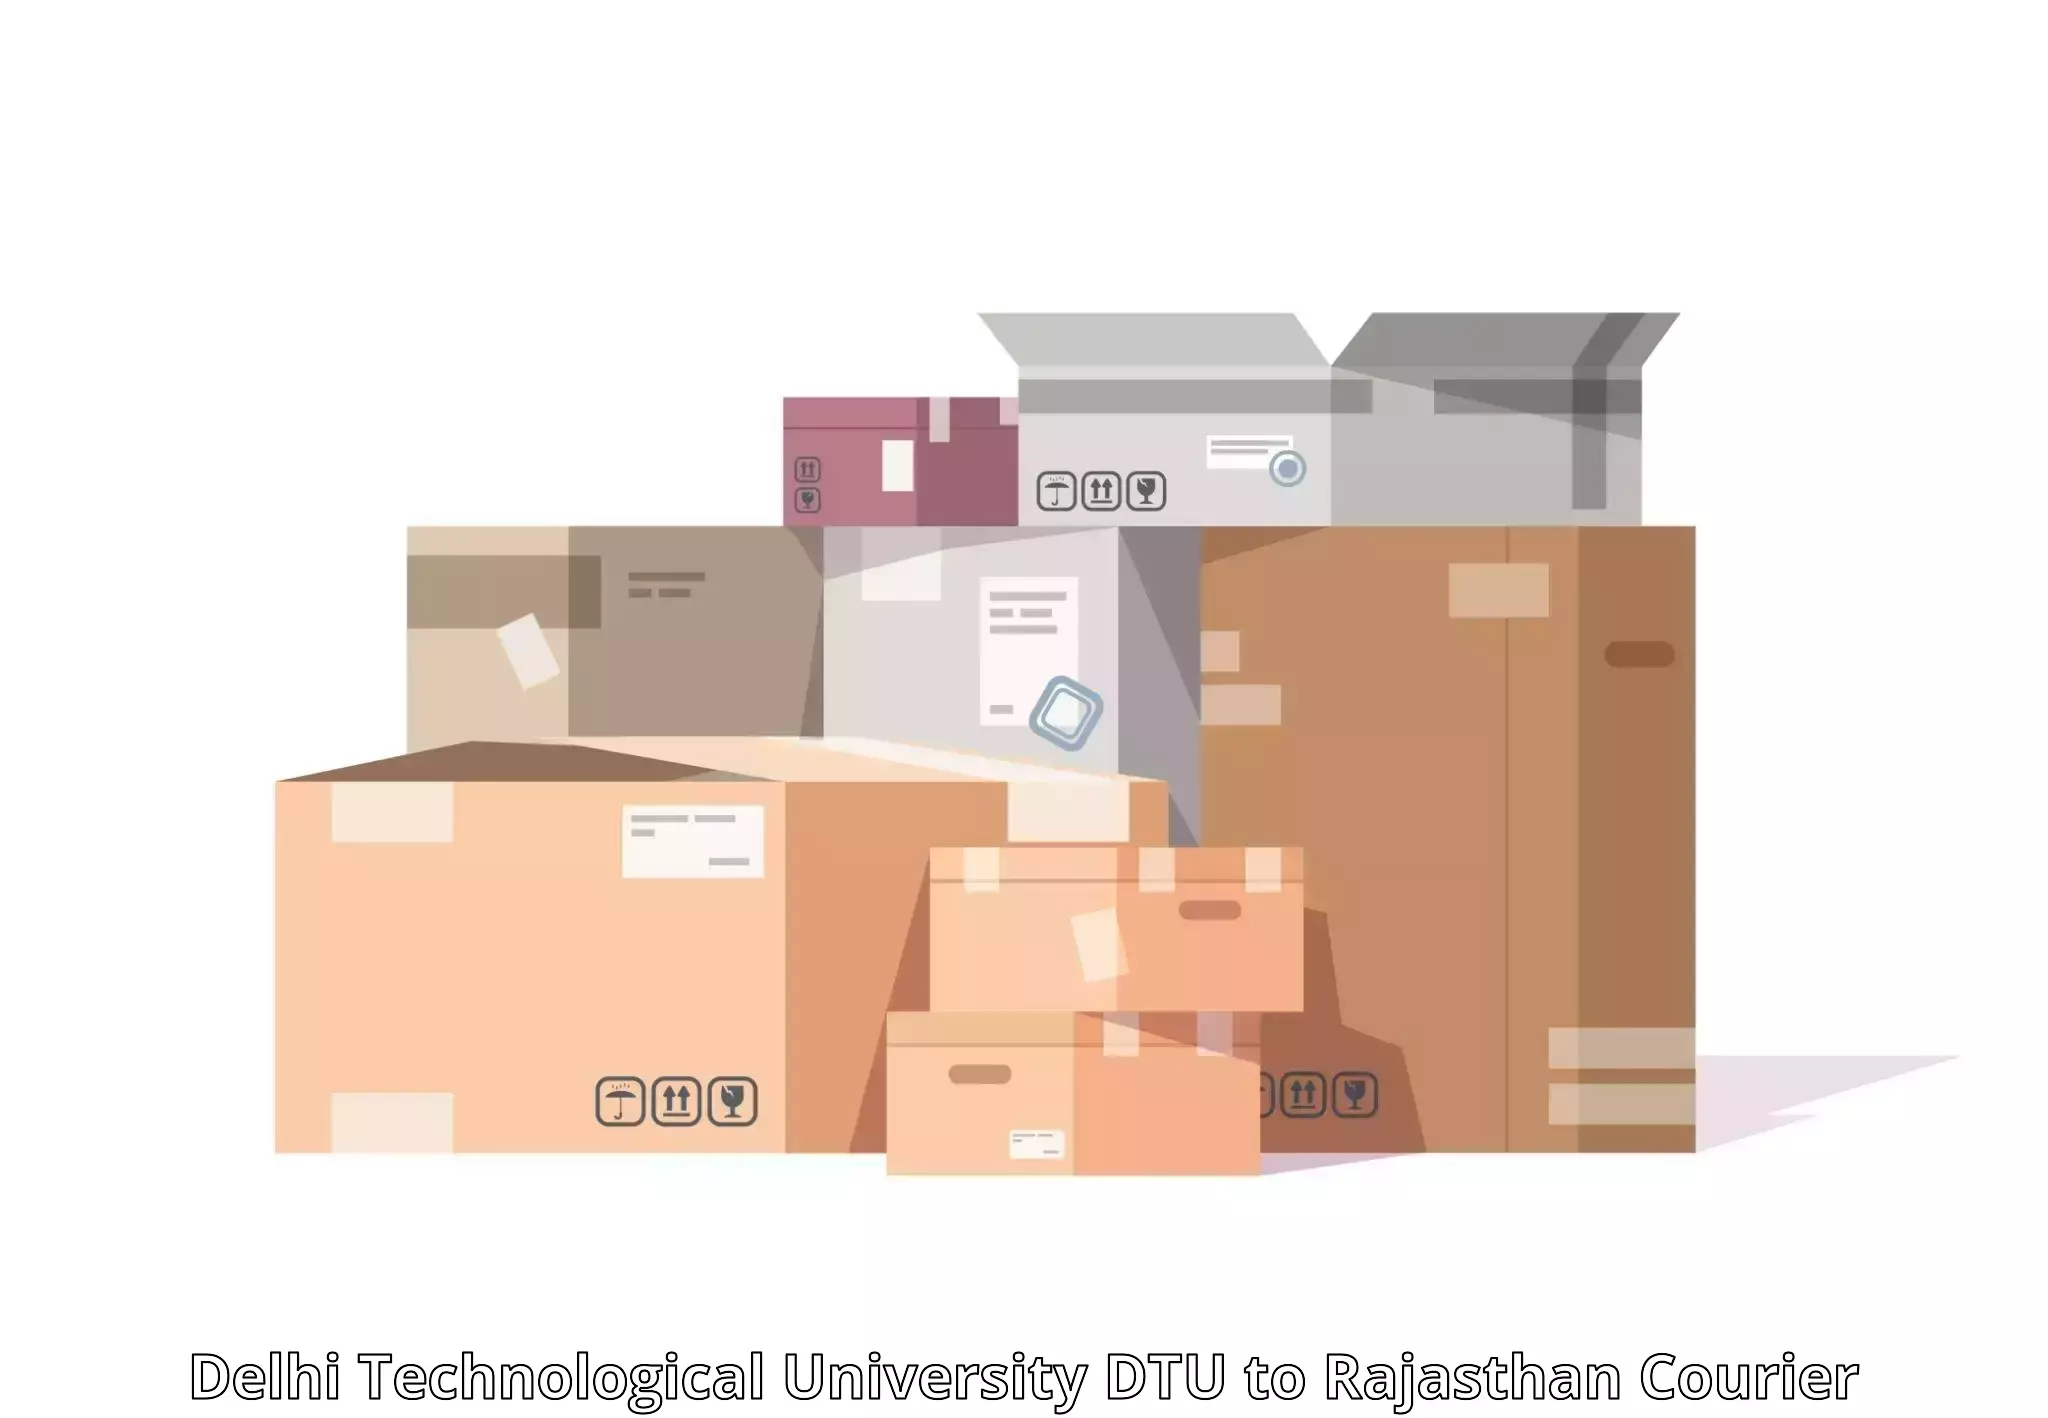 Next day courier in Delhi Technological University DTU to Khanpur